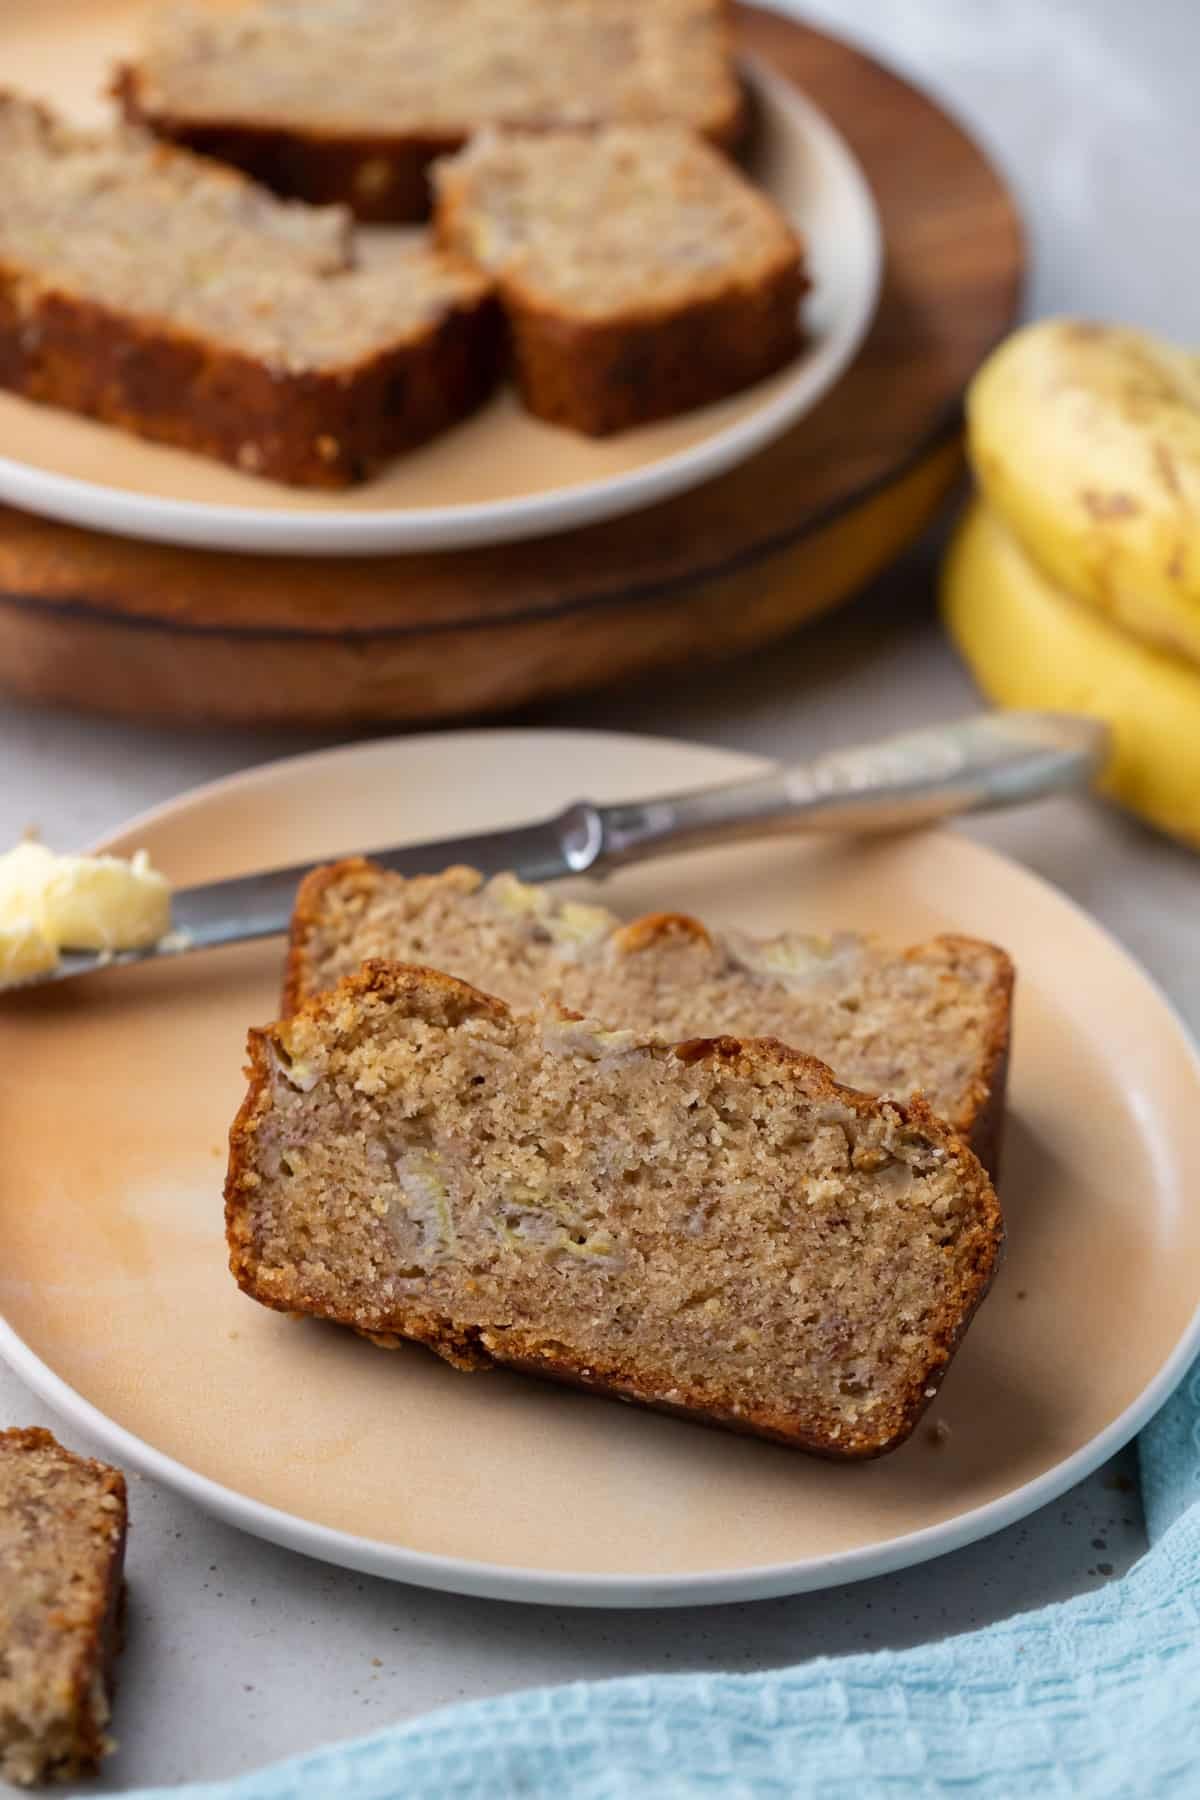 two slices of banana bread on a plate with a butter knife.